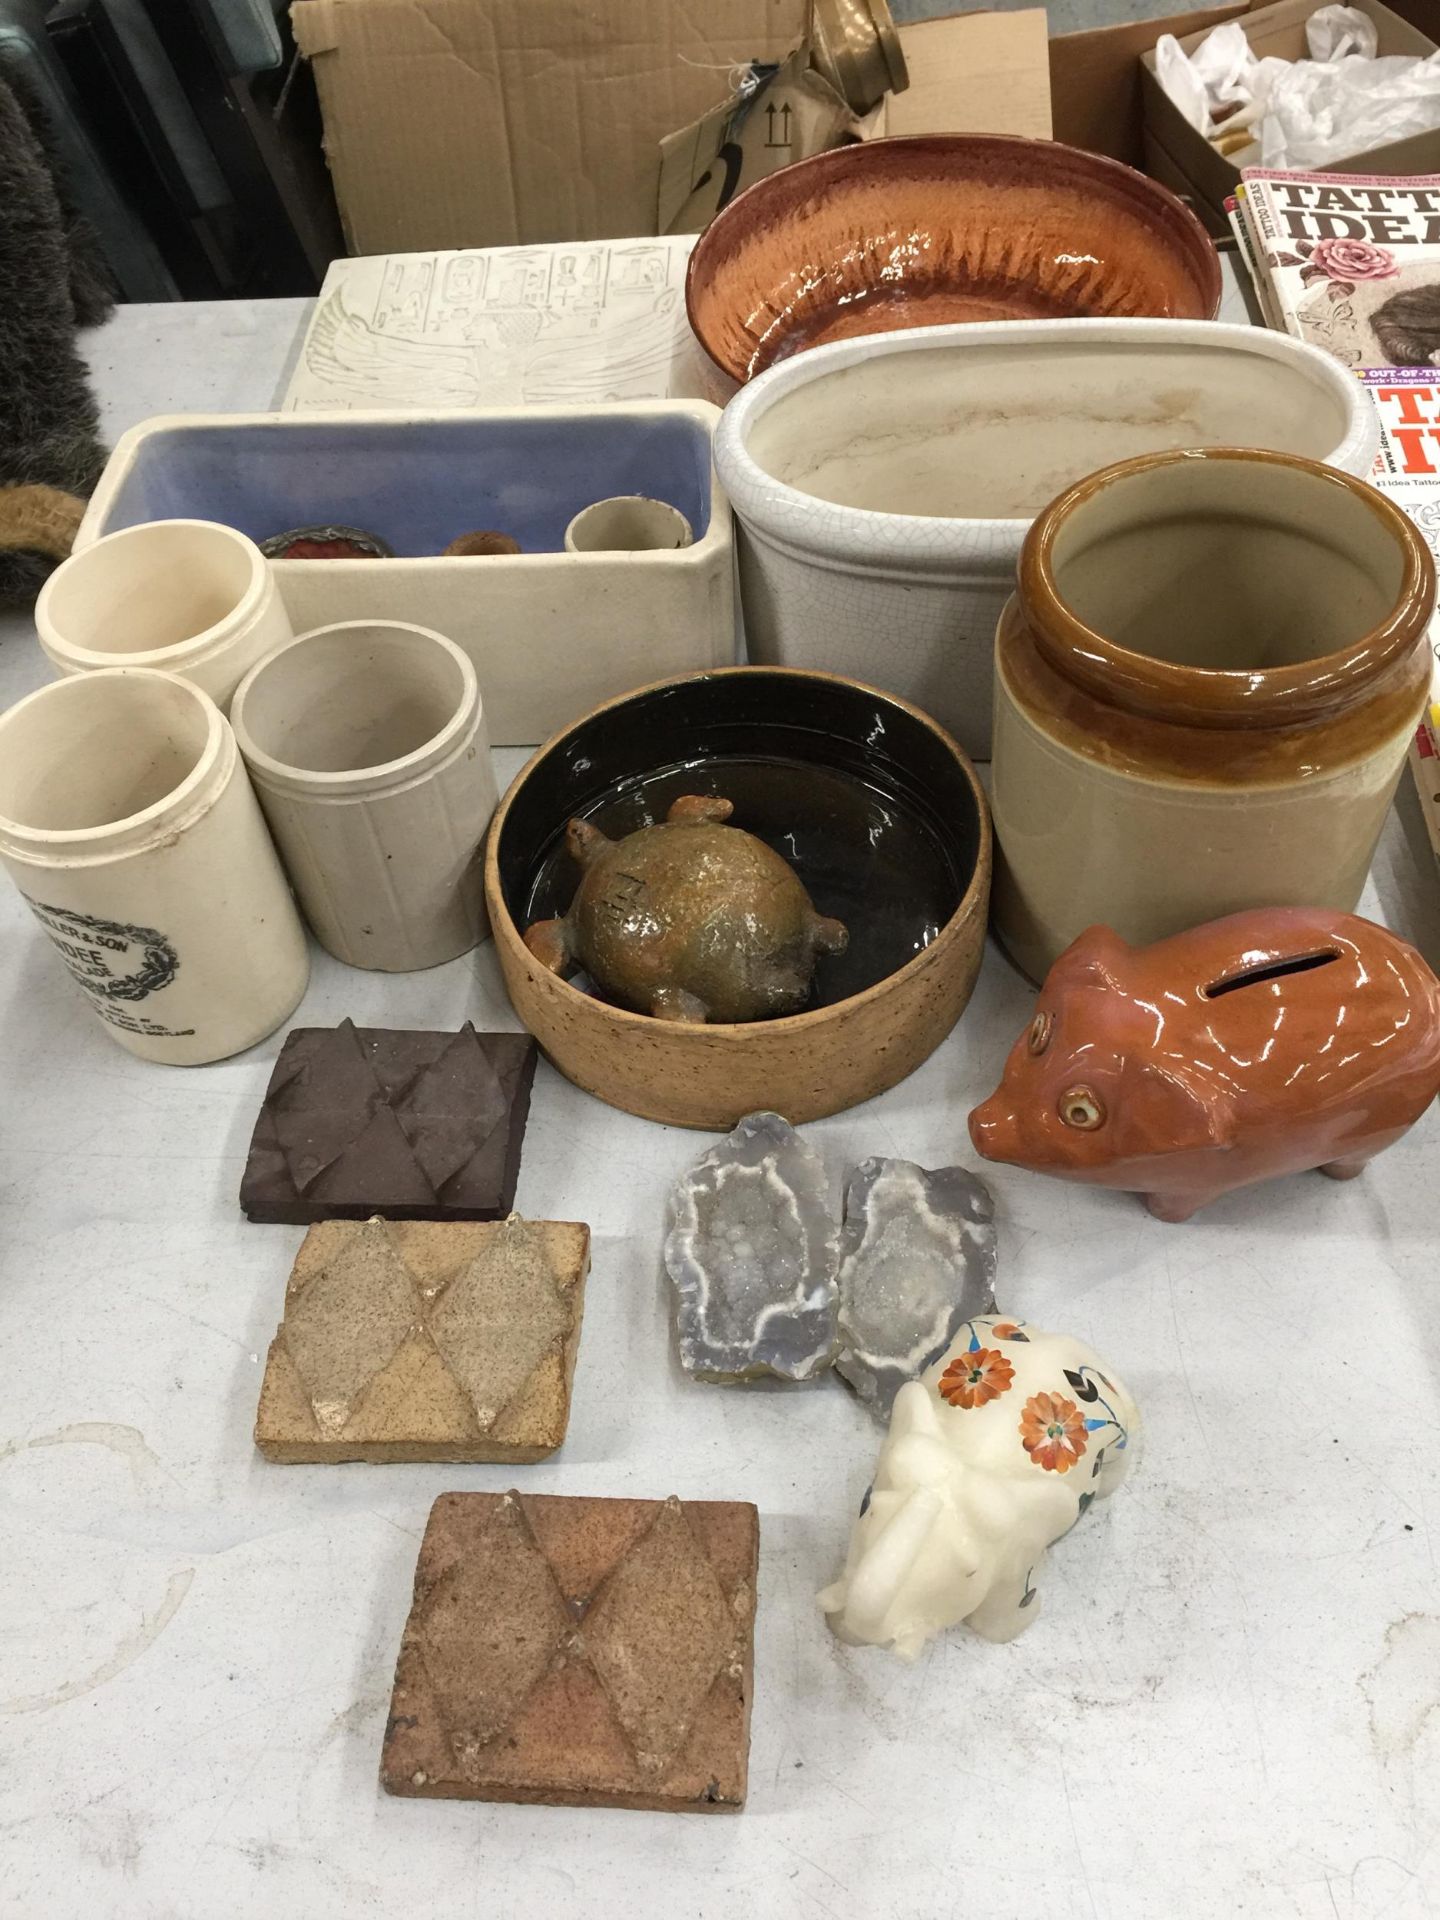 A LARGE QUANTITY OF STONEWARE ITEMS TO INCLUDE MARMALADE POTS, PLANTERS, BOWLS, FIGURES, INLAID